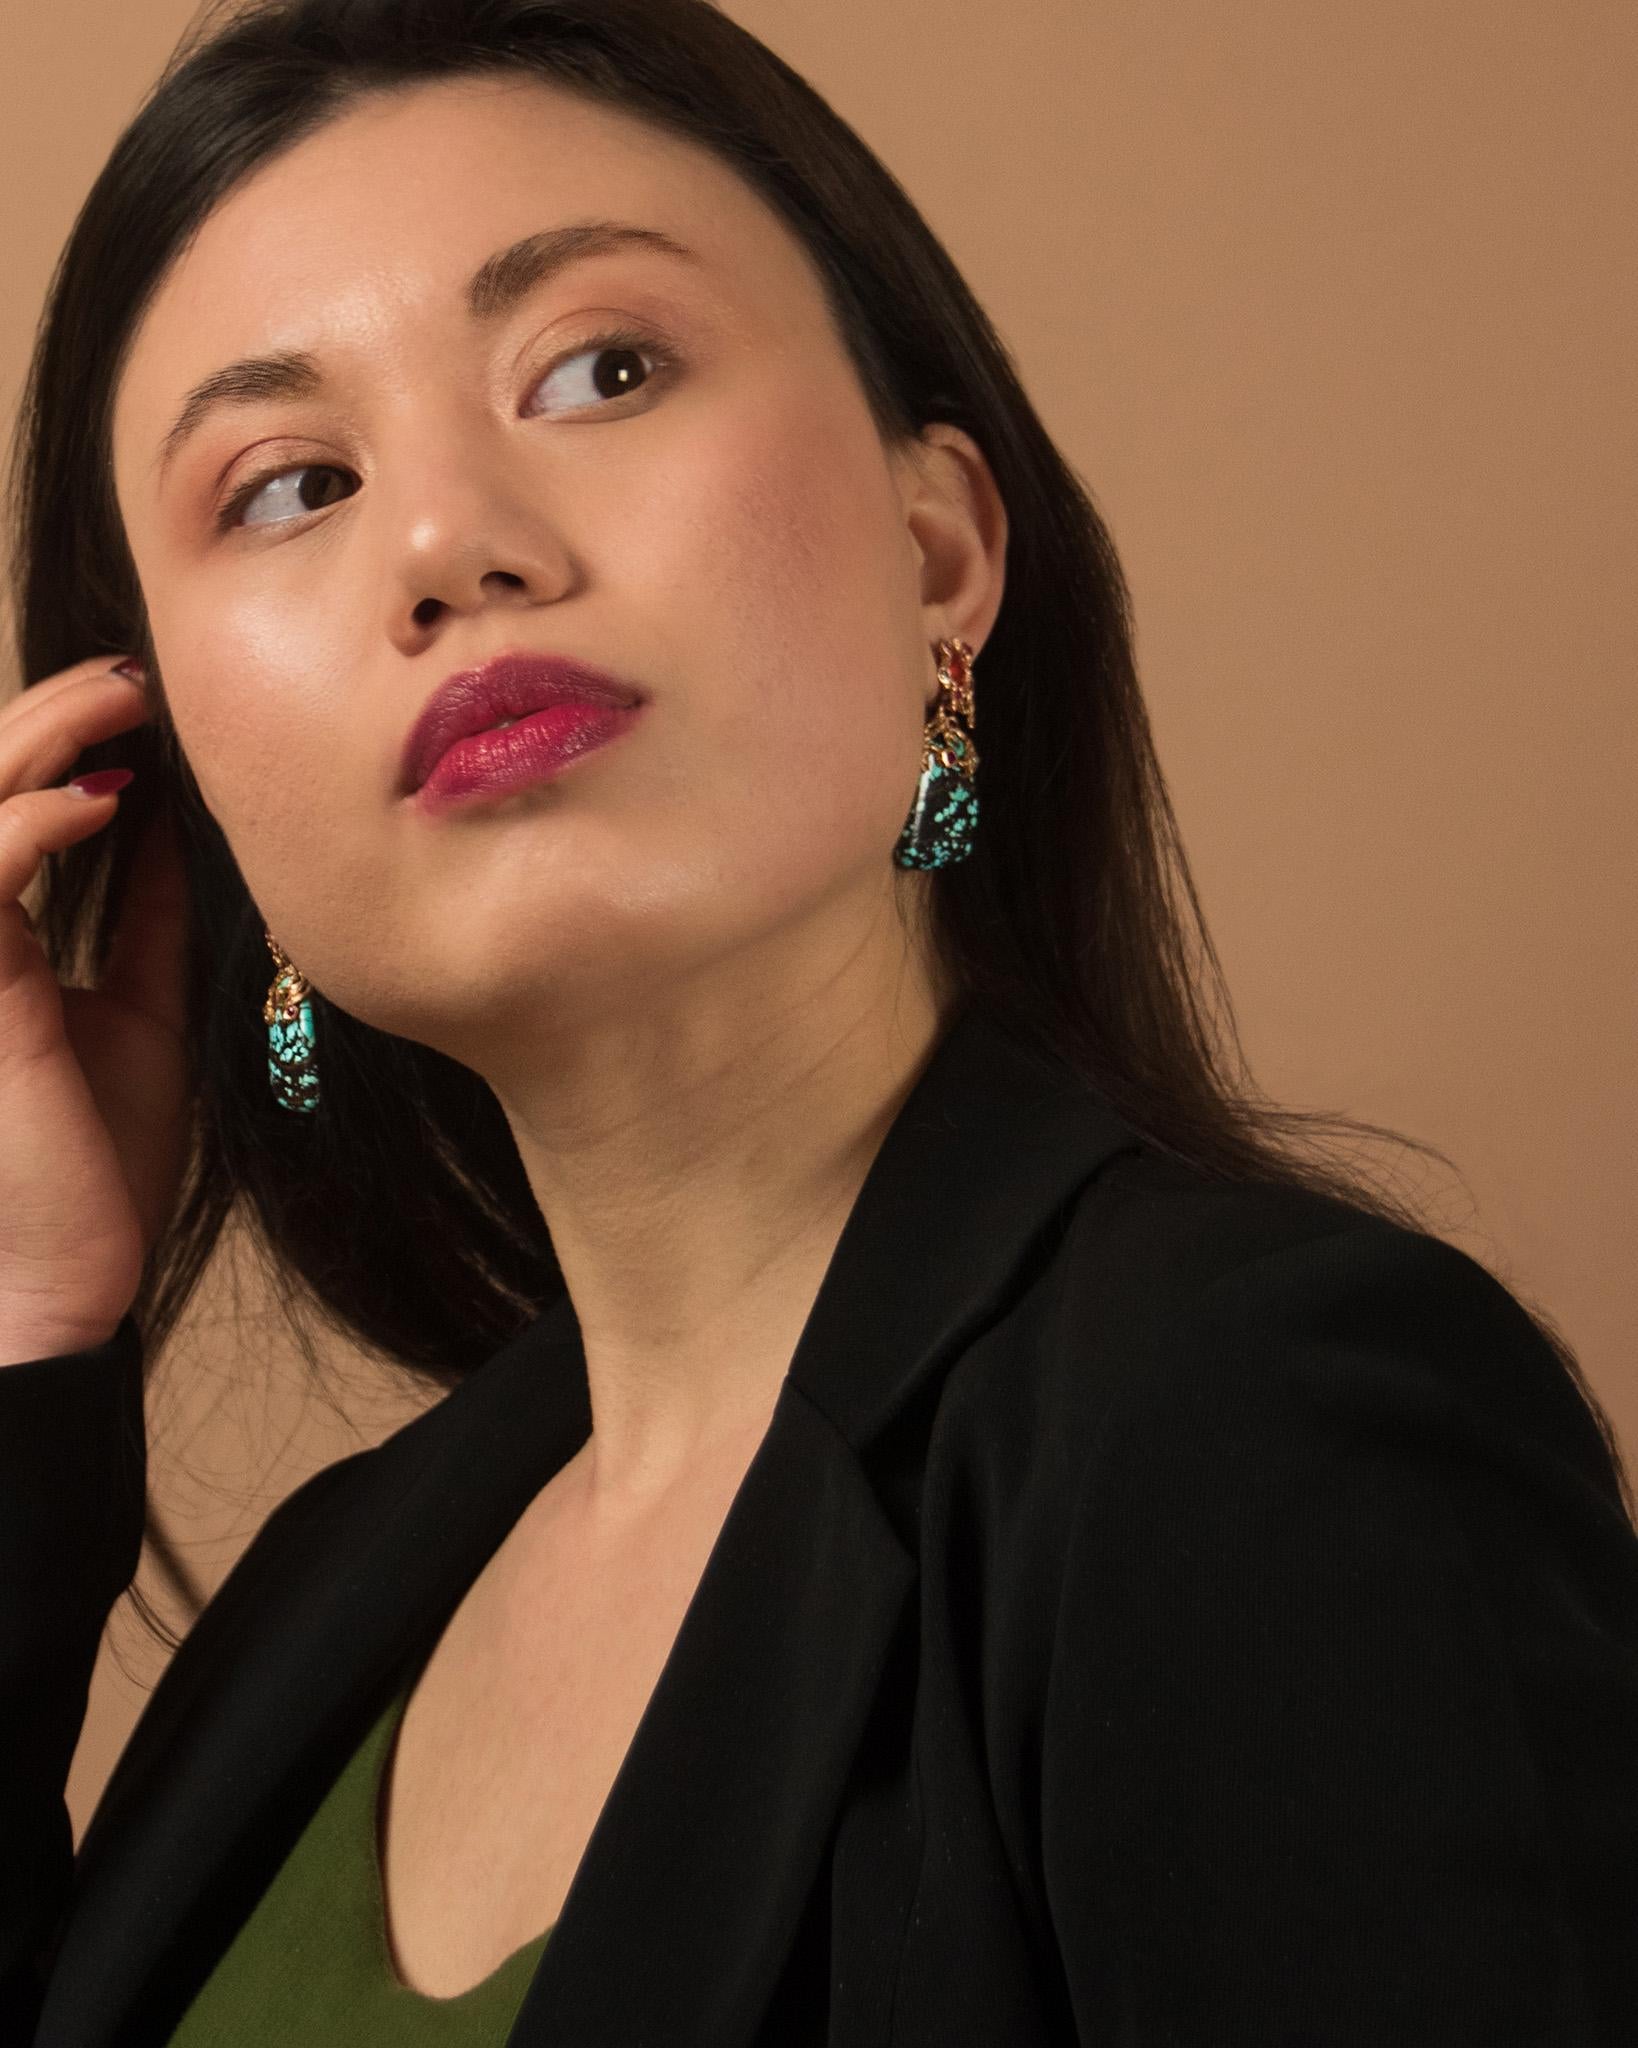 These detachable earrings are crafted by Tvrrini as part of its Lava series. Inspired by the volcano that impacted Atlantis, this design features a versatile way of styling as sculptural details are visible at all angles. The drop earrings convey a